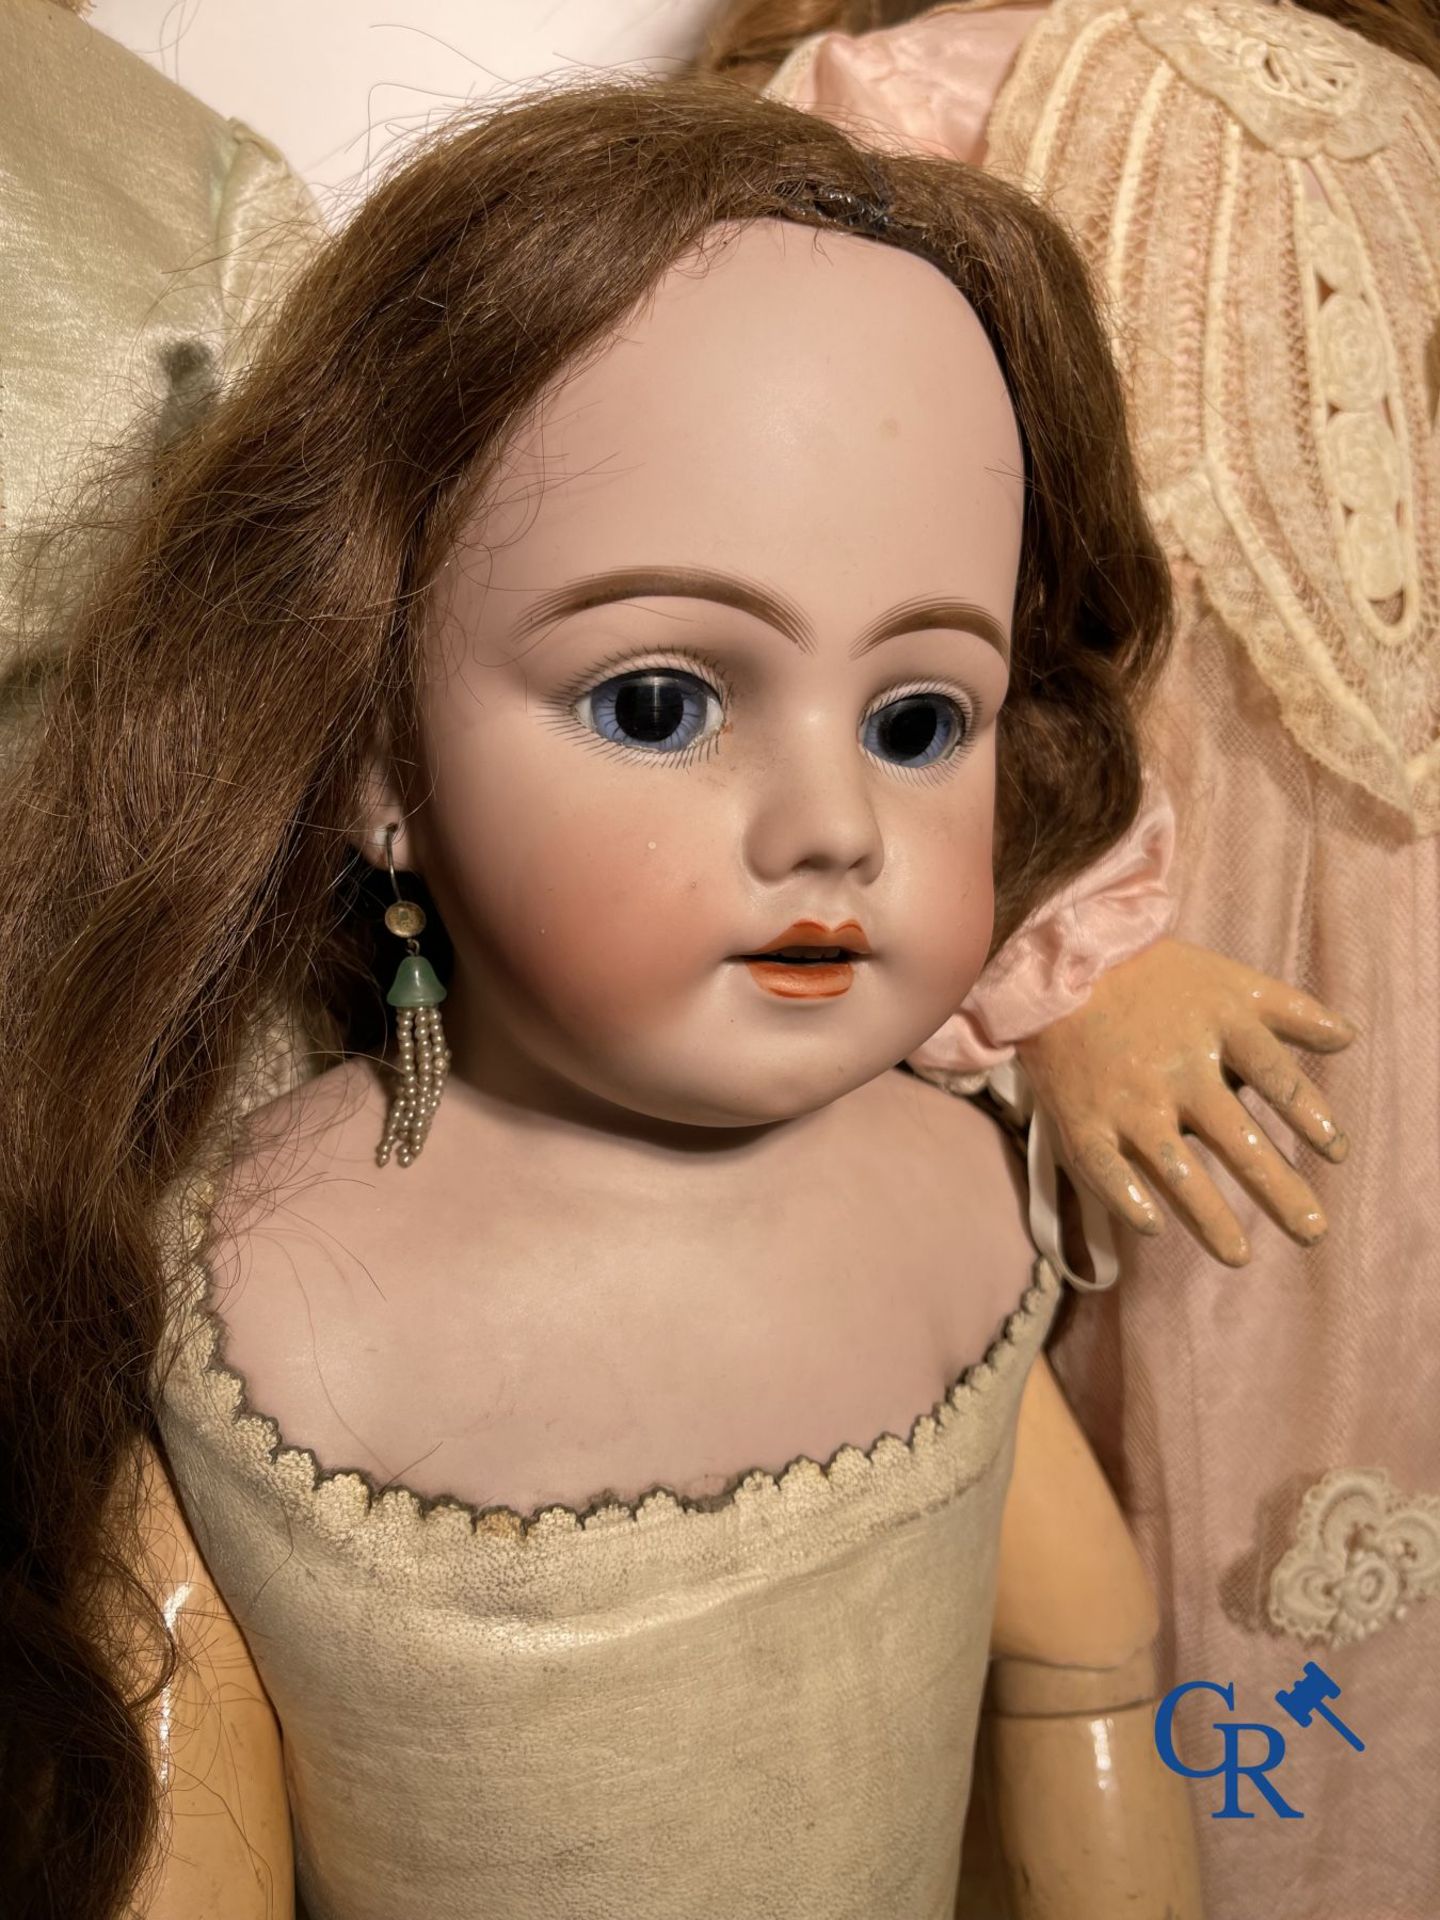 Toys: antique dolls: Lot of 3 dolls with porcelain head. - Image 4 of 13